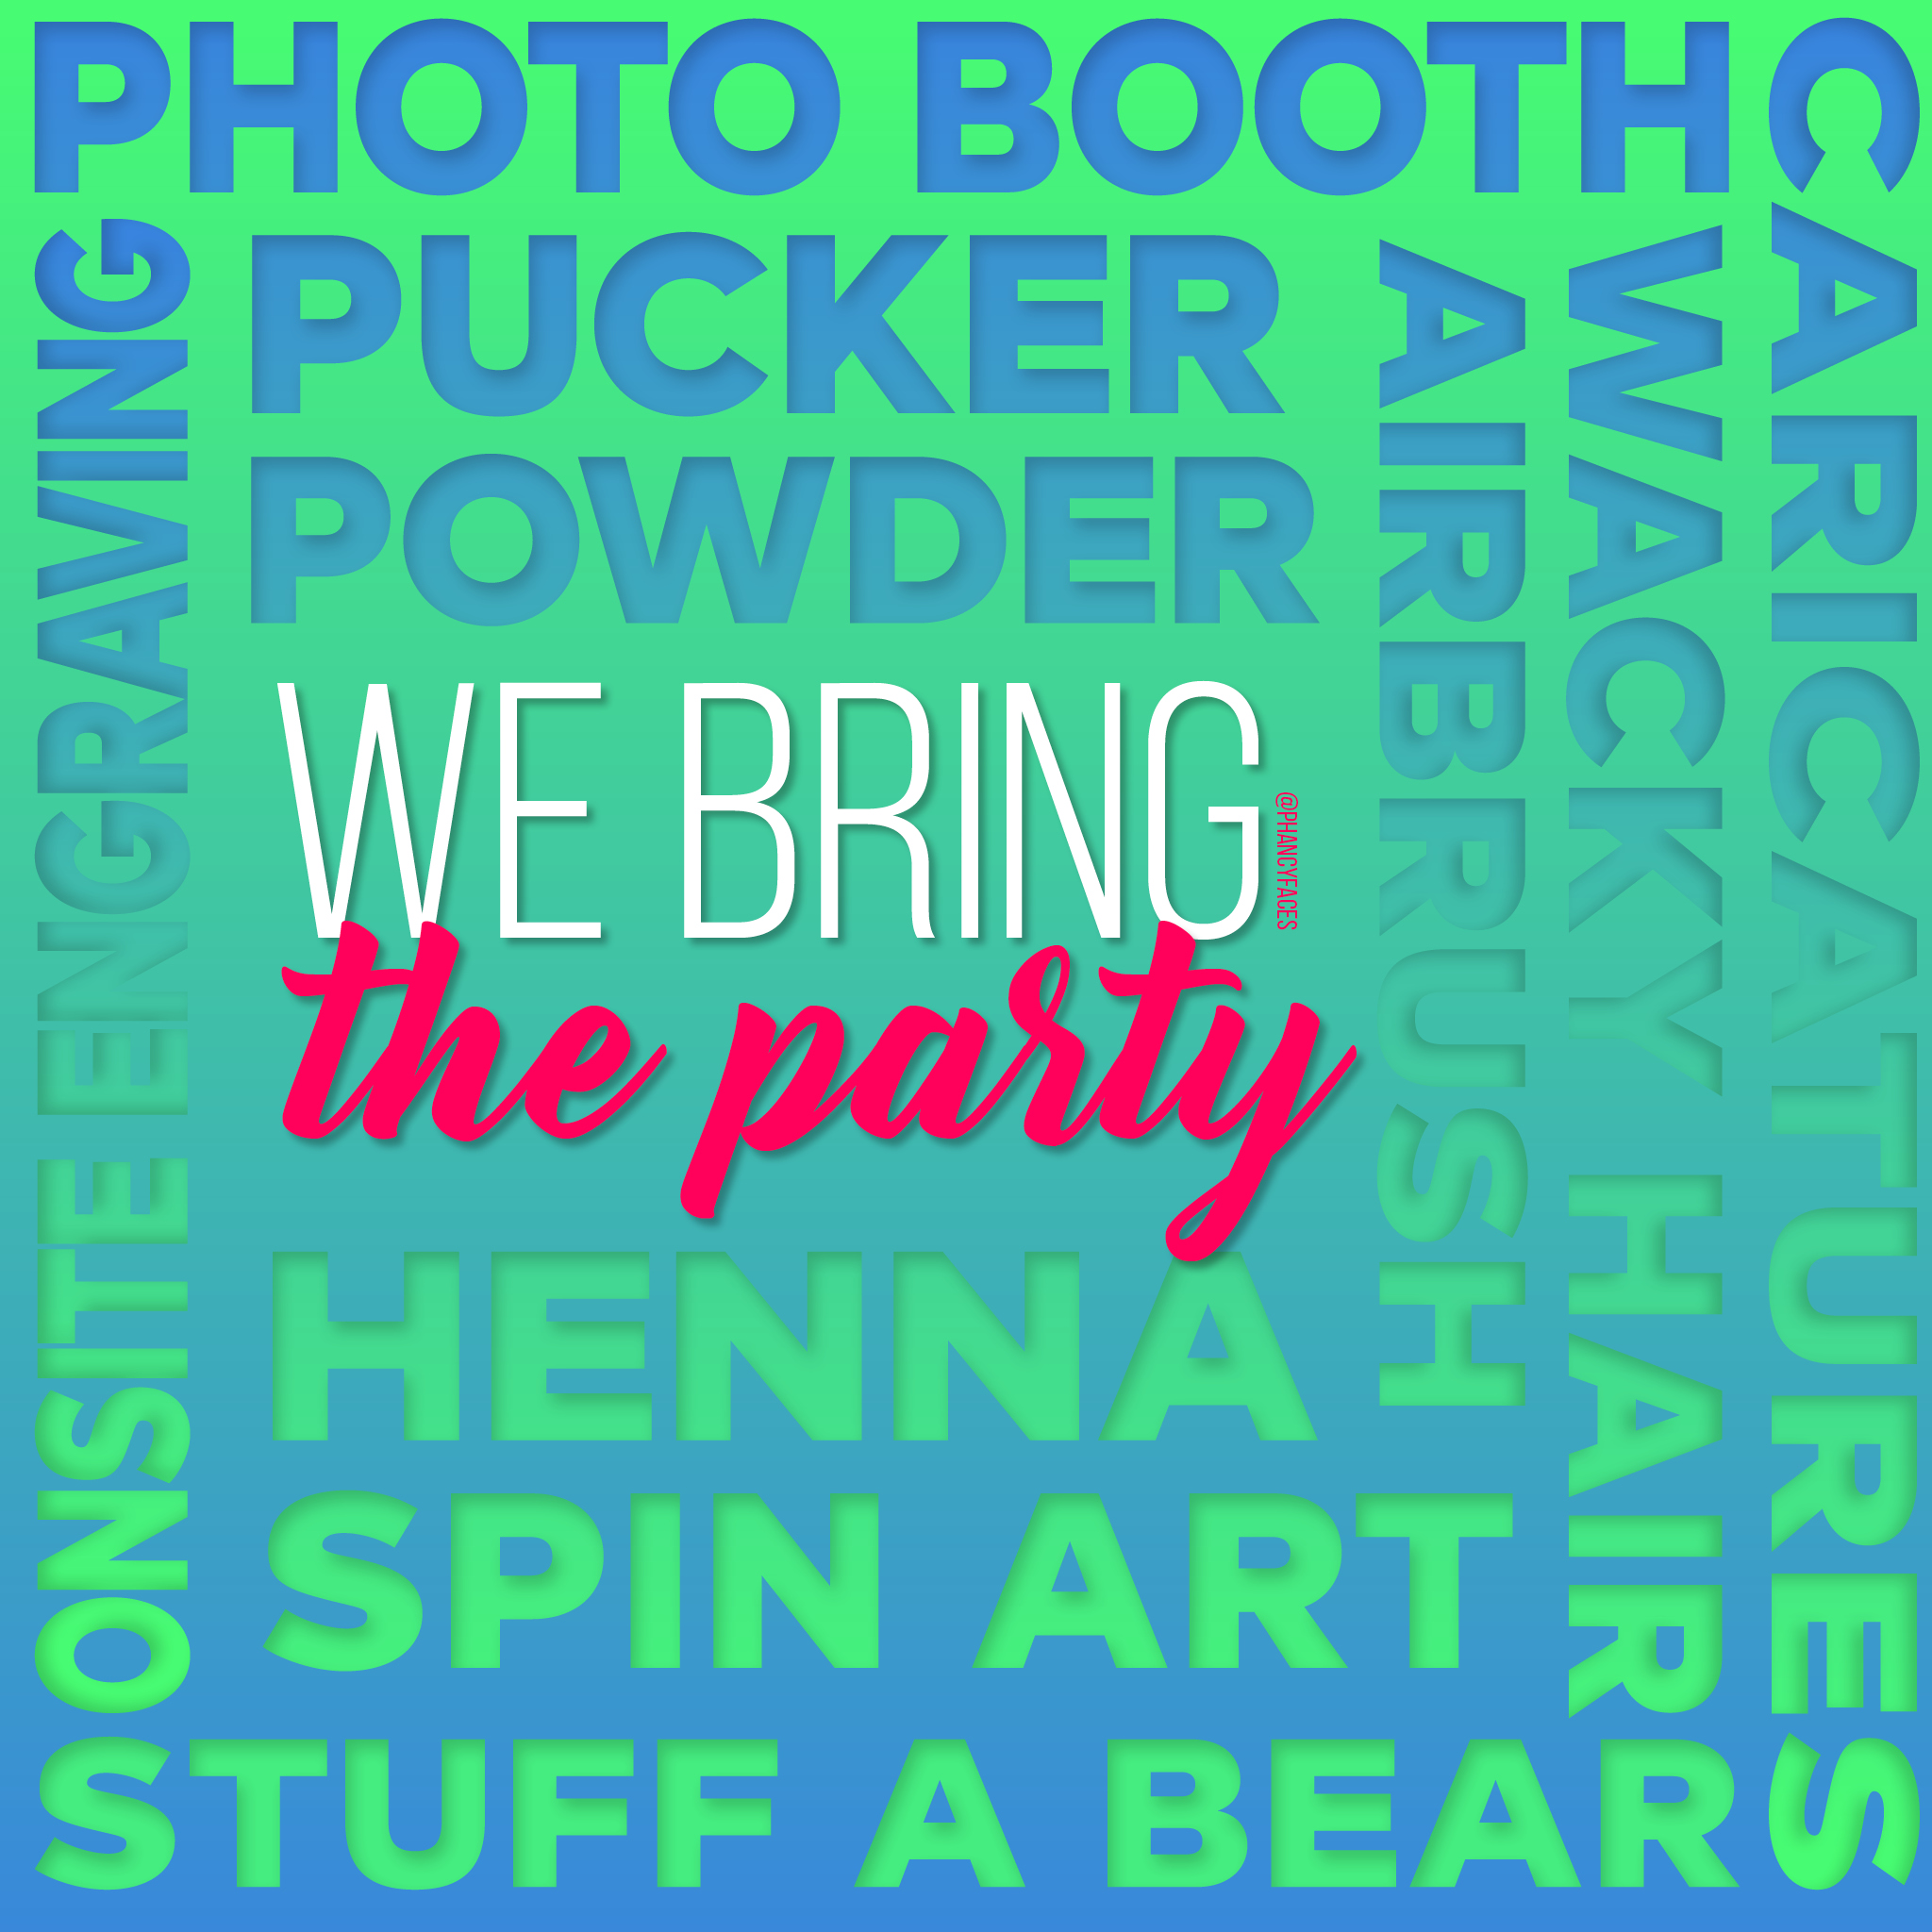 Party Services Pucker Powder Spin Art Make A Bear Caricatures Photobooths Backdrops and more